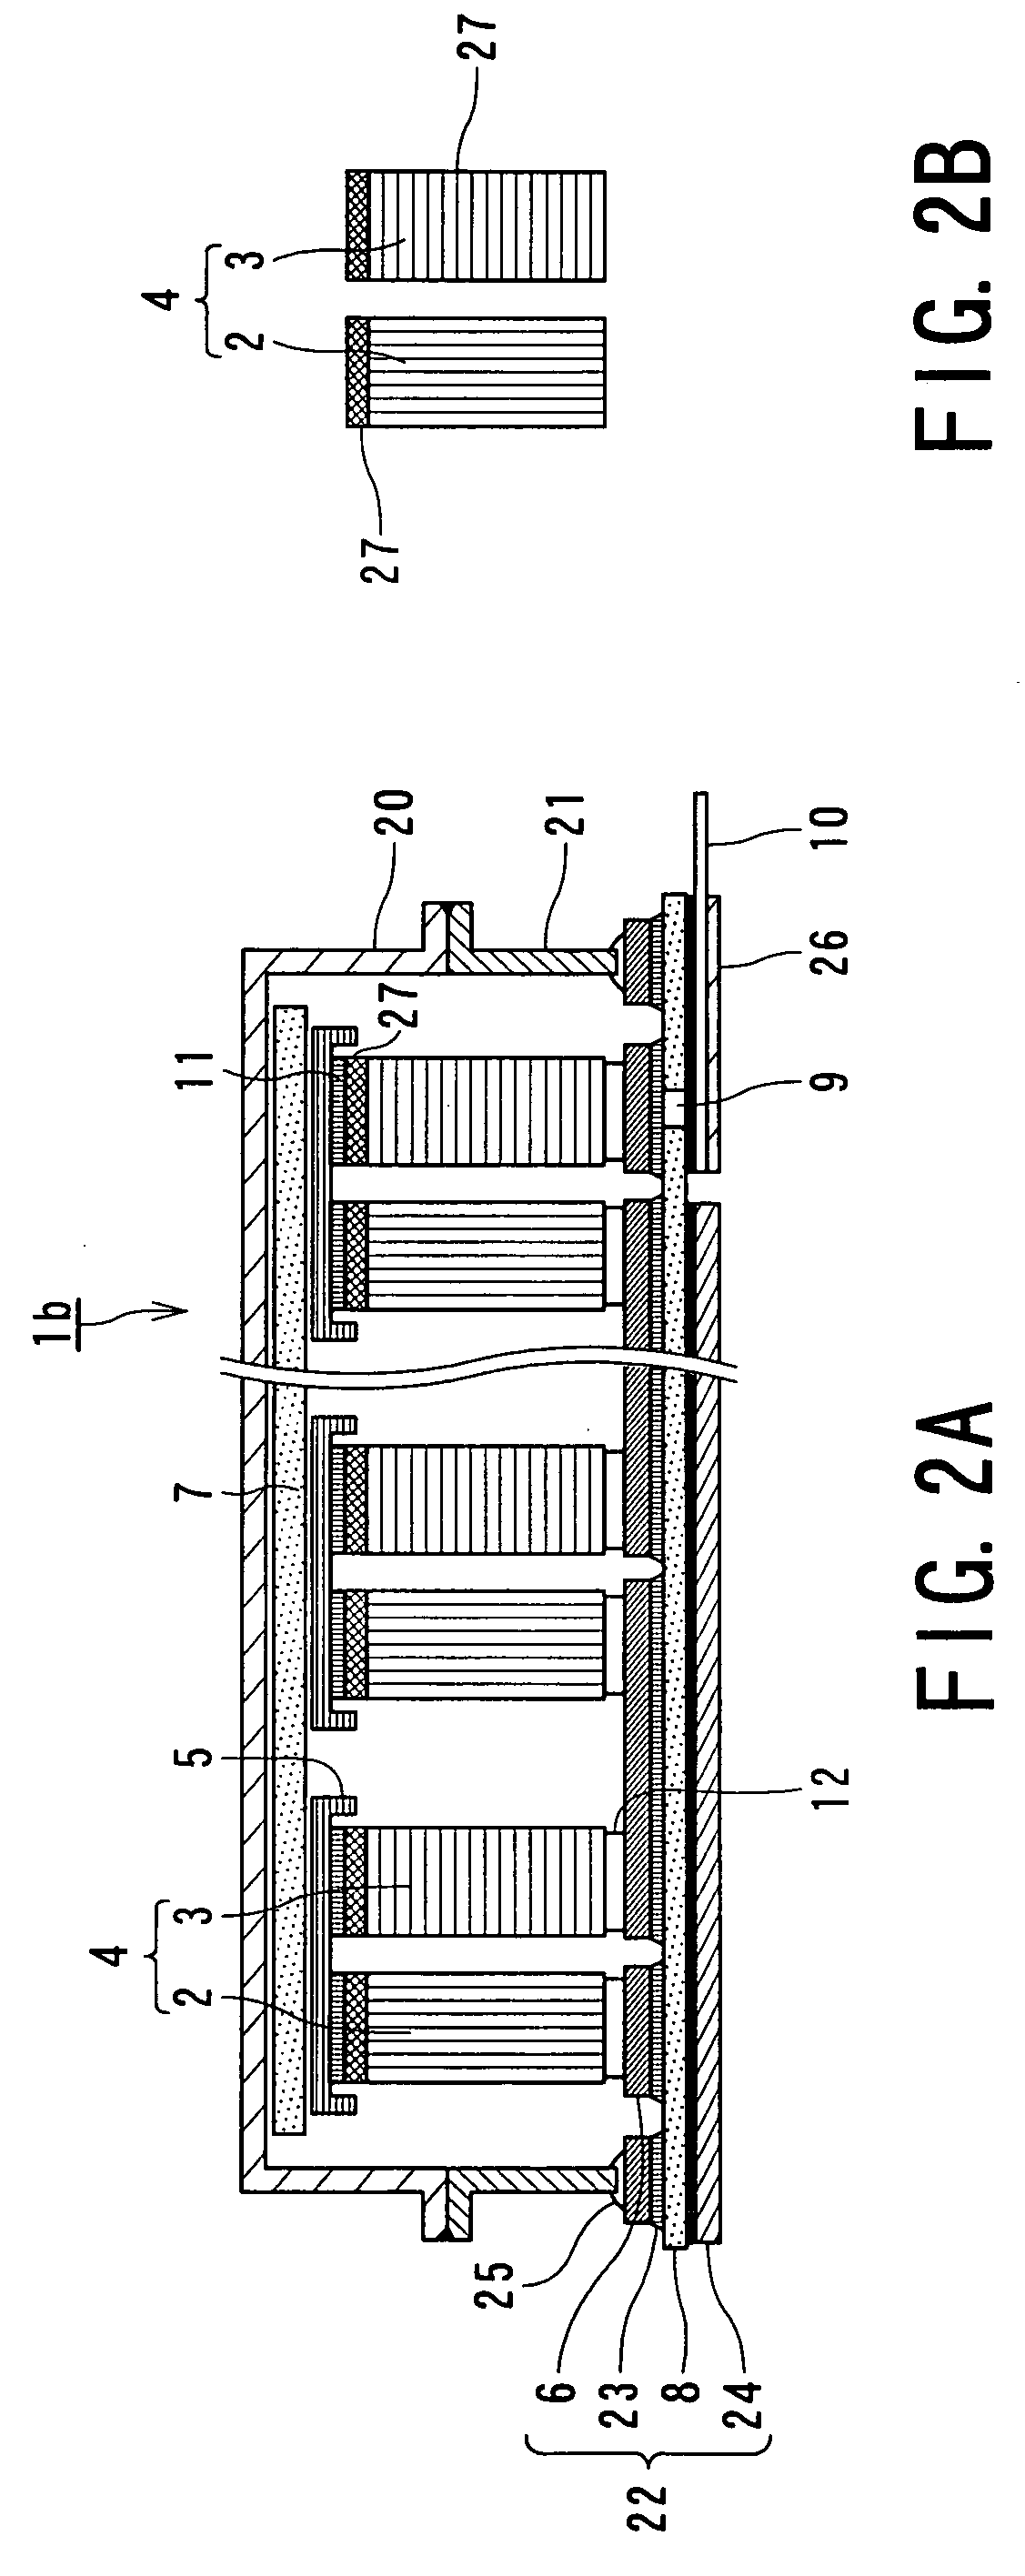 Thermoelectric direct conversion device